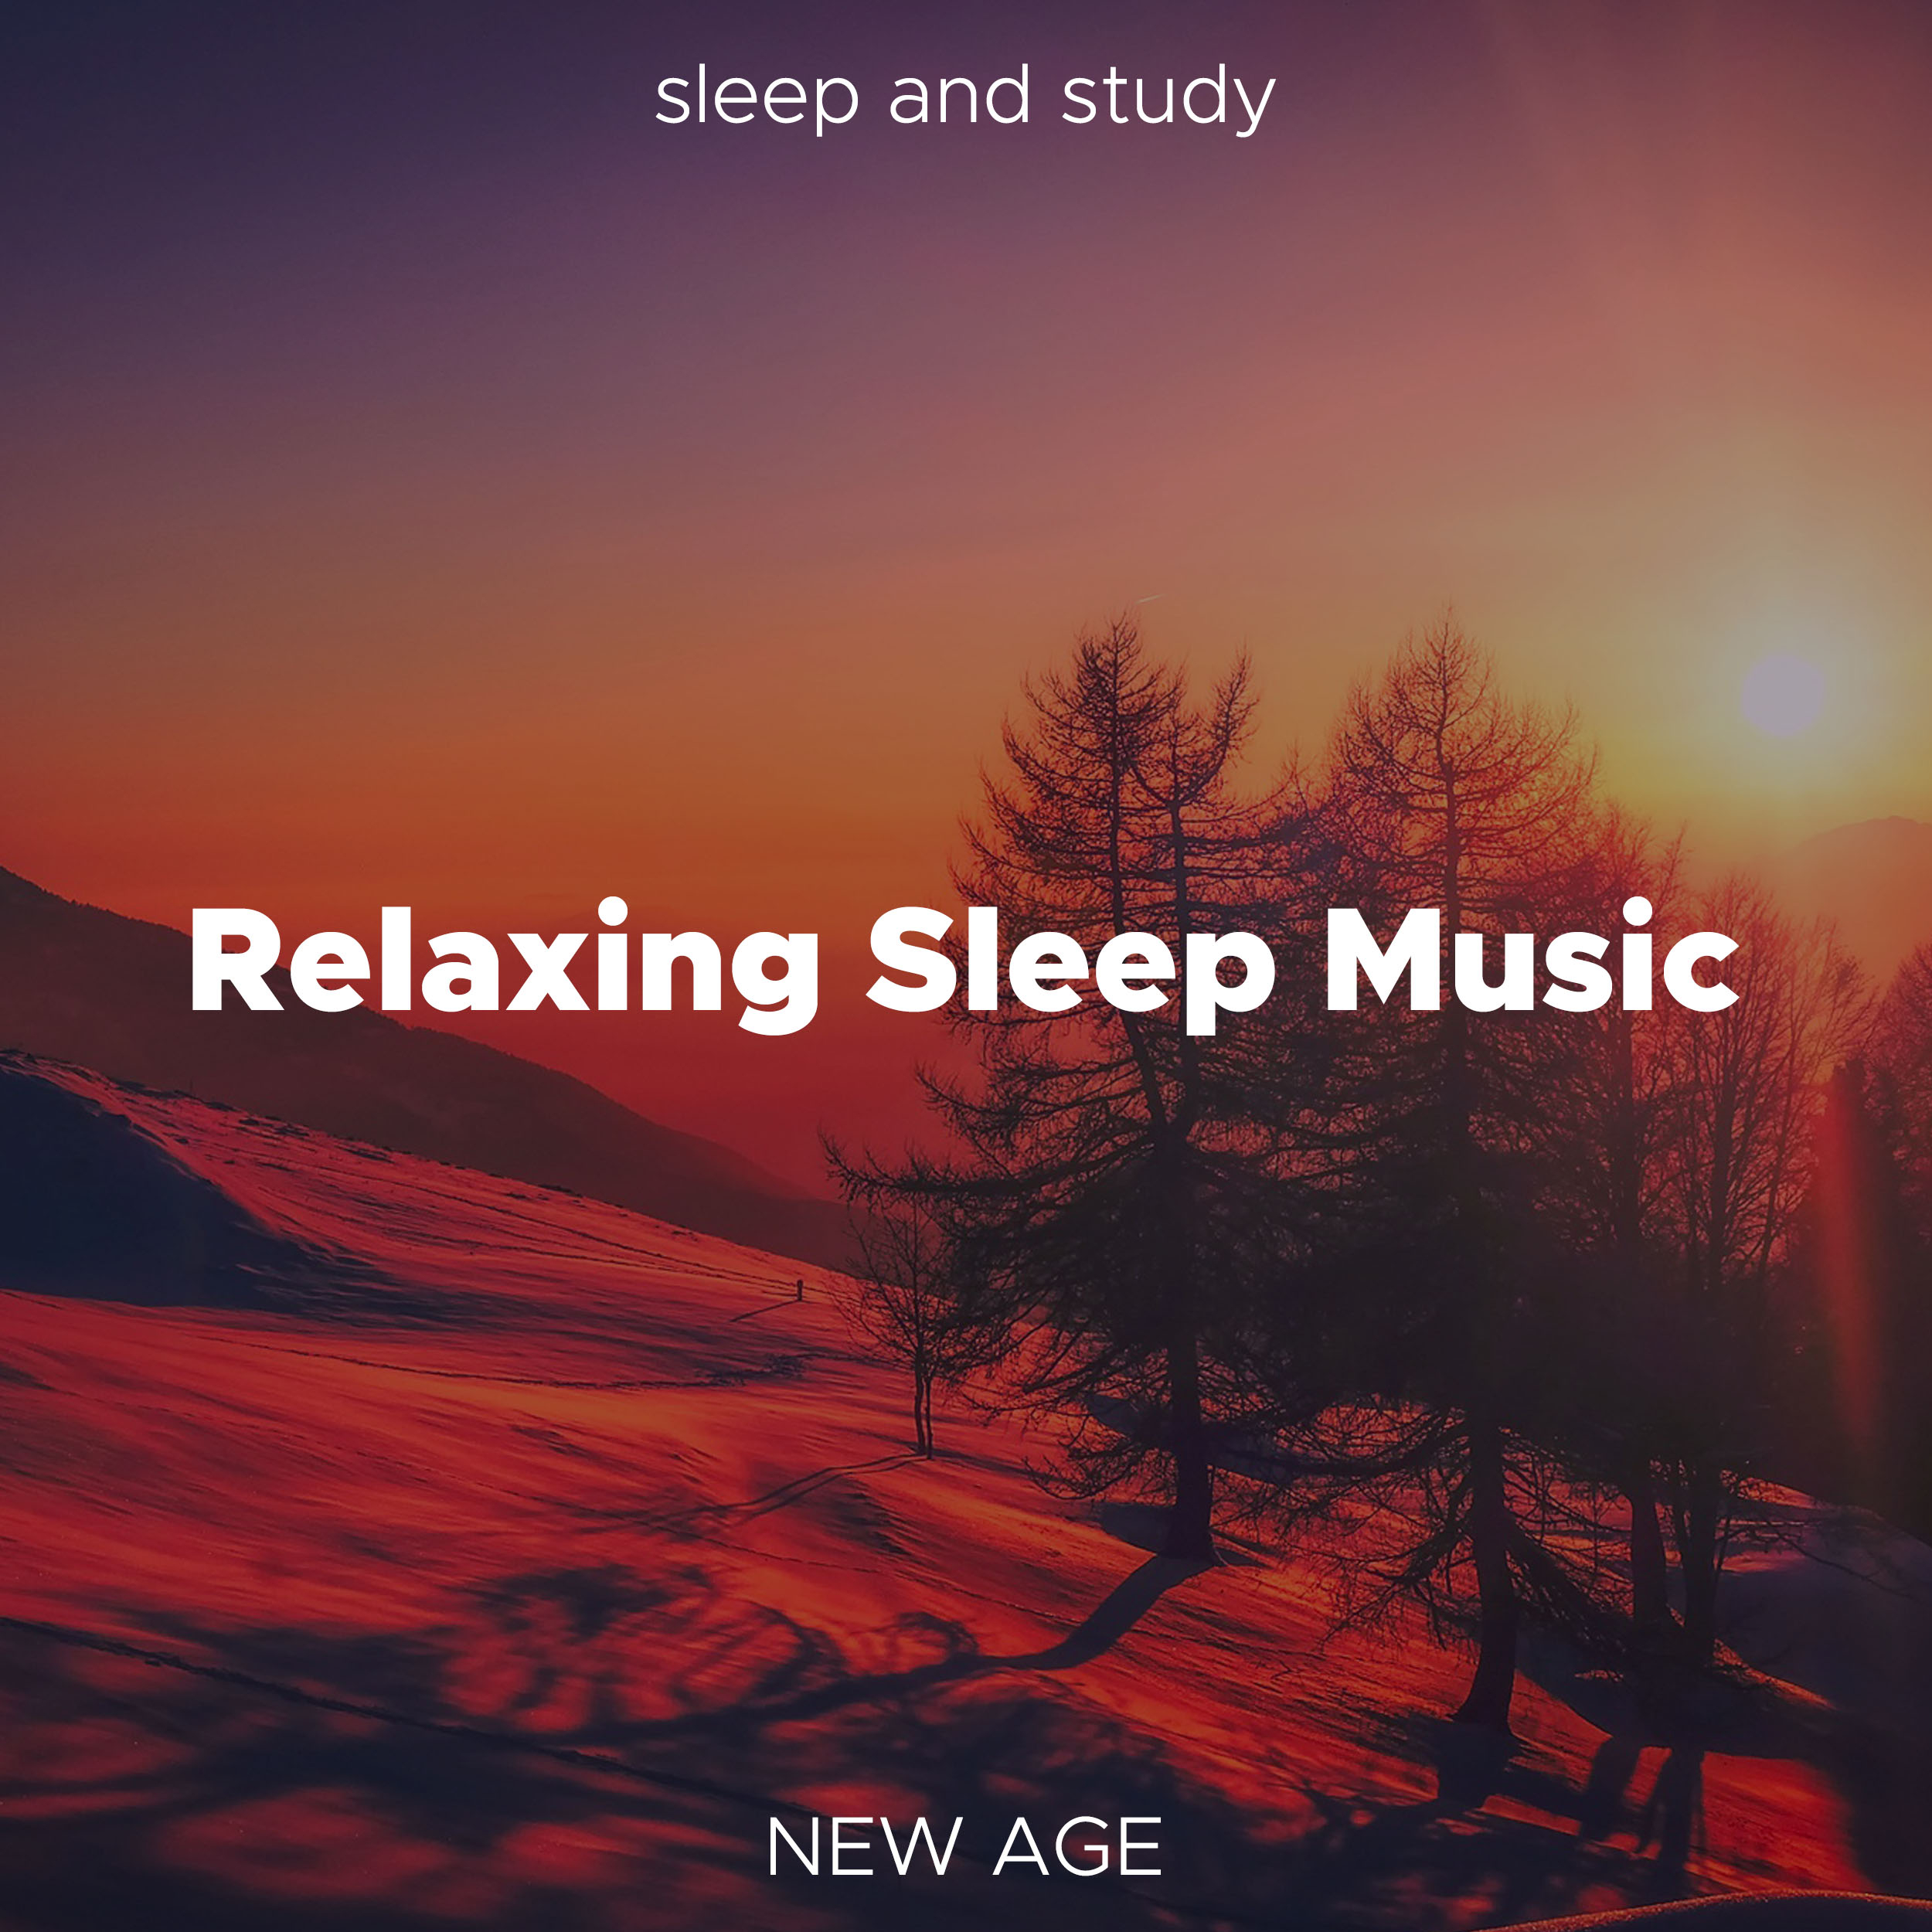 Relaxing Sleep Music: Long Playlist of Relaxing Soft Piano Music to Sleep and Study